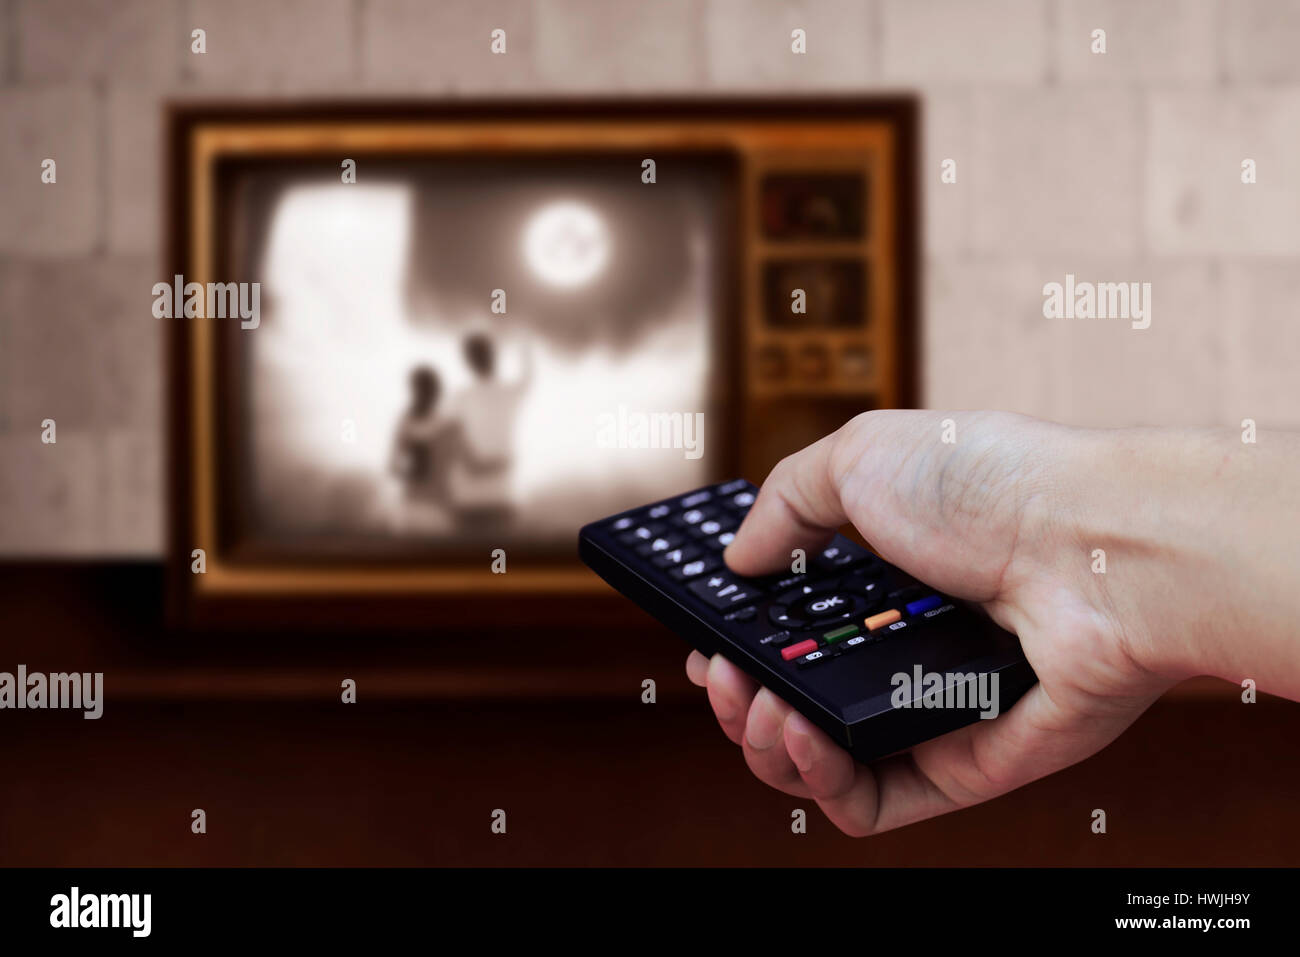 Man hand holding TV remote control with a television in the background Stock Photo